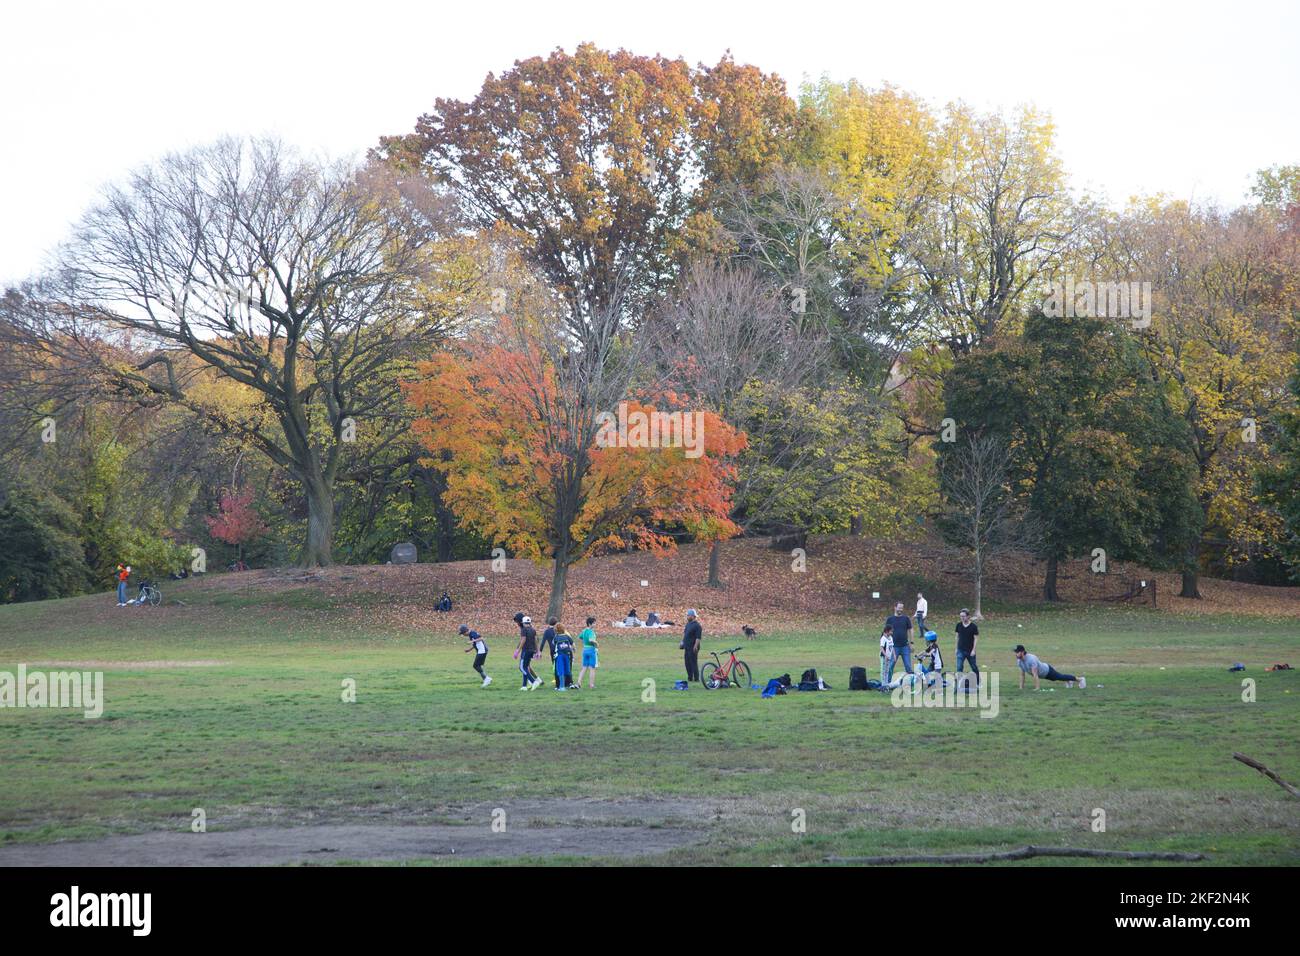 Warm November afternoon in the Long Meadow at Prospect Park in Brooklyn, New York. Stock Photo